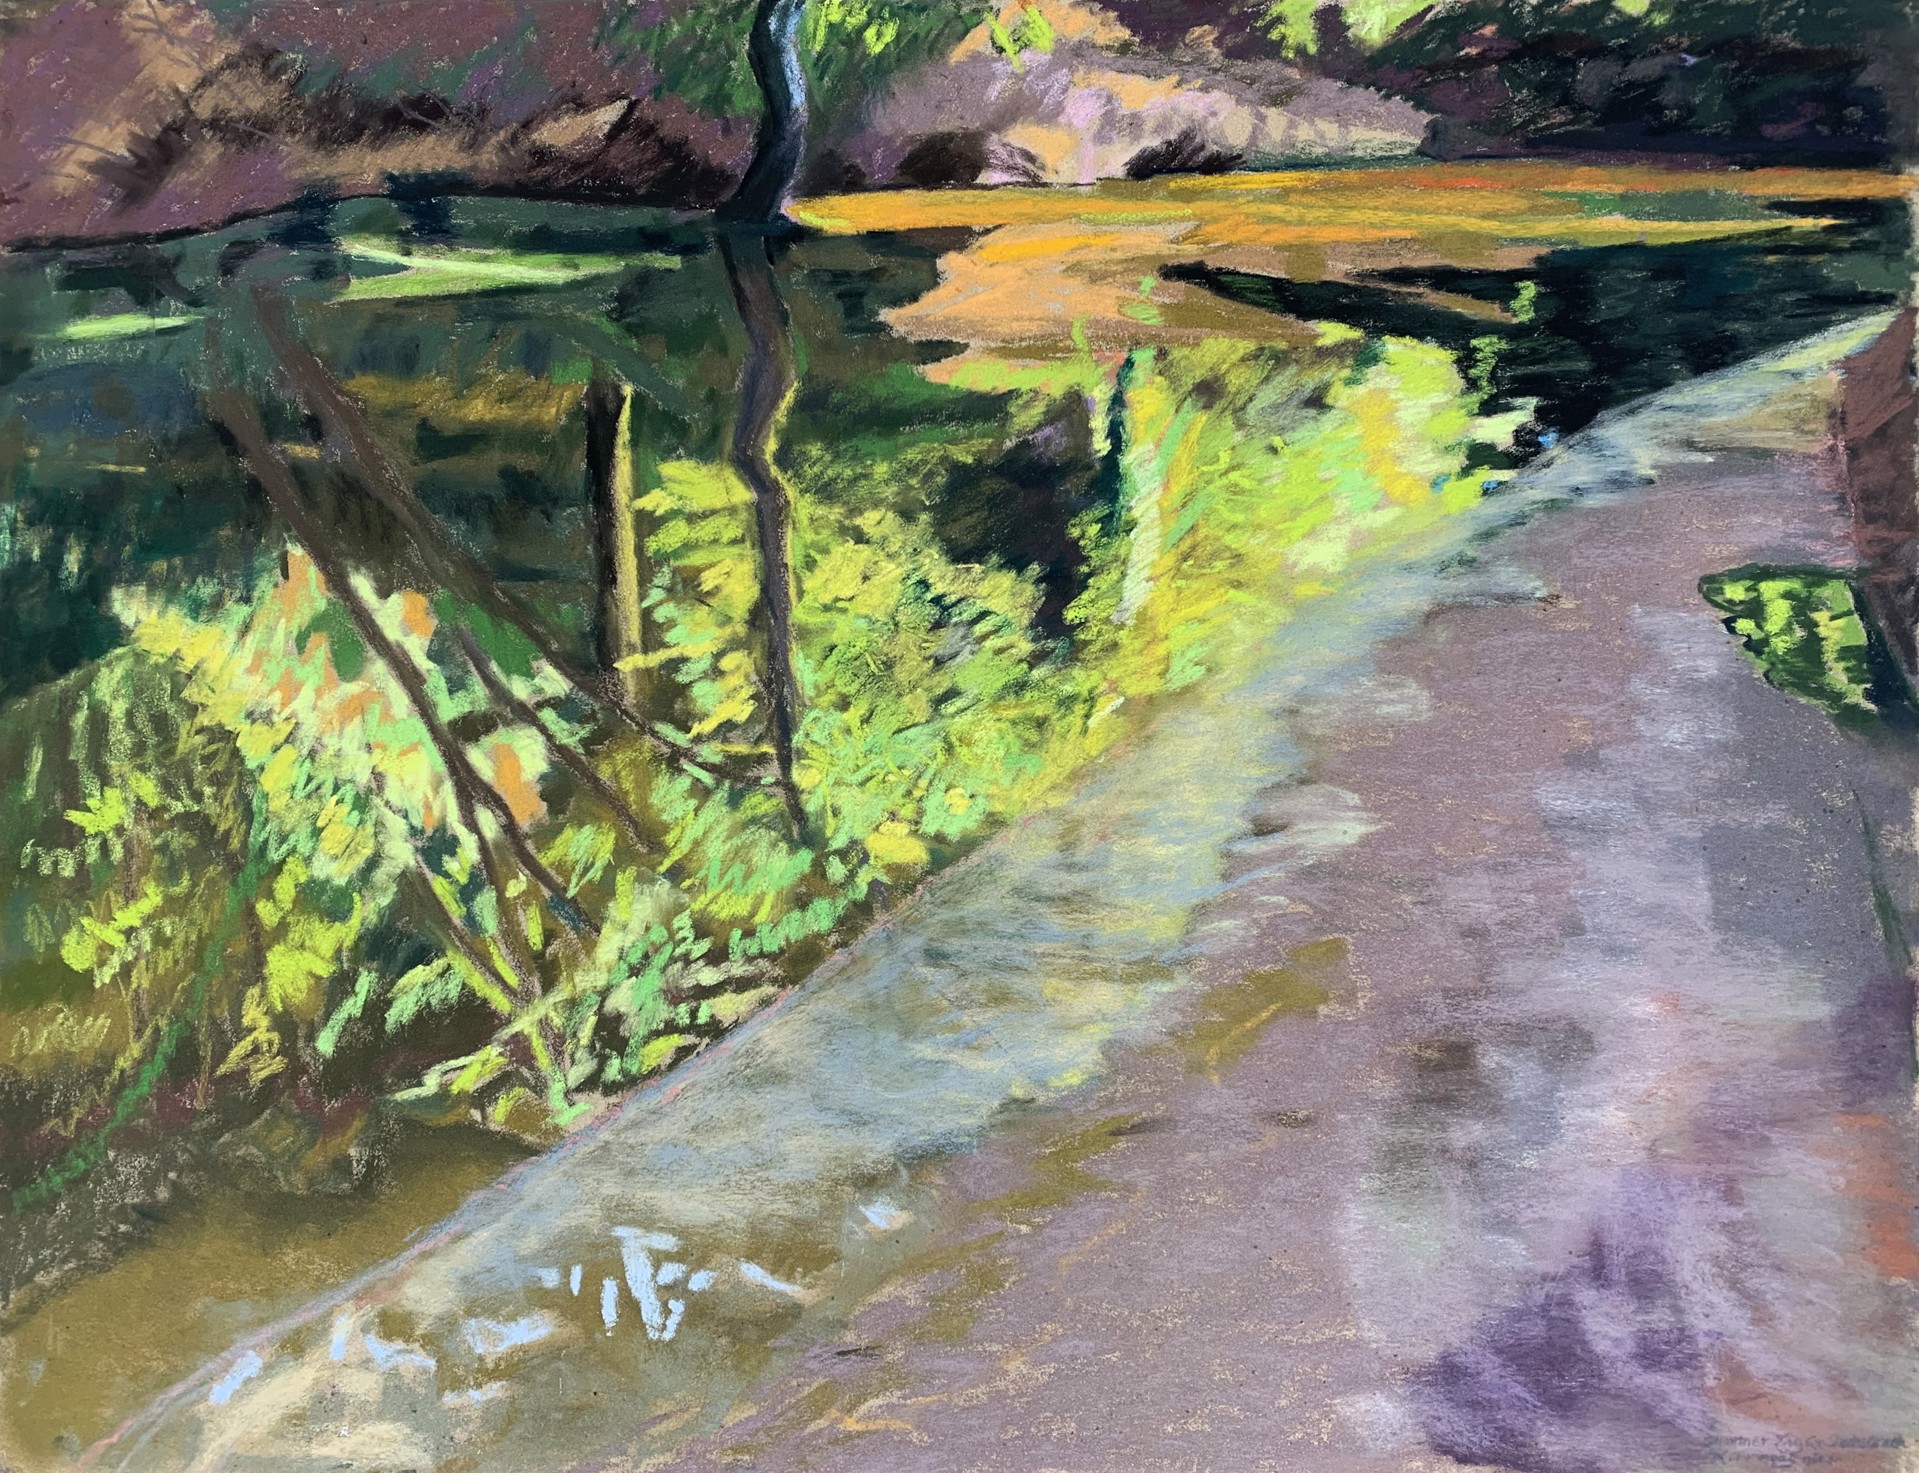 Summer Light on Shades Creek by Kate Trepagnier